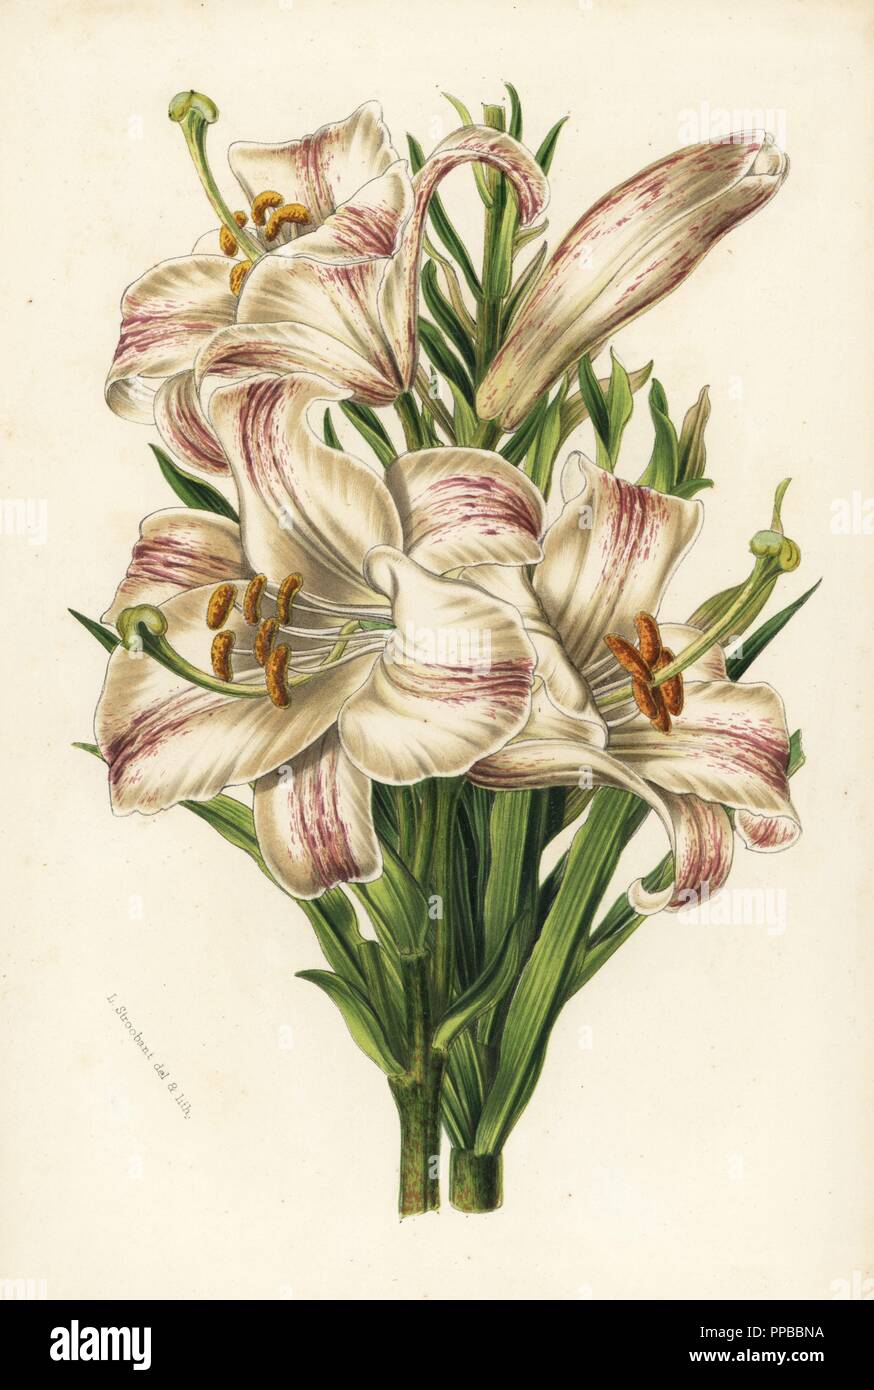 Madonna lily, Lilium candidum flore striato. Handcoloured lithograph from Louis van Houtte and Charles Lemaire's Flowers of the Gardens and Hothouses of Europe, Flore des Serres et des Jardins de l'Europe, Ghent, Belgium, 1851. Stock Photo